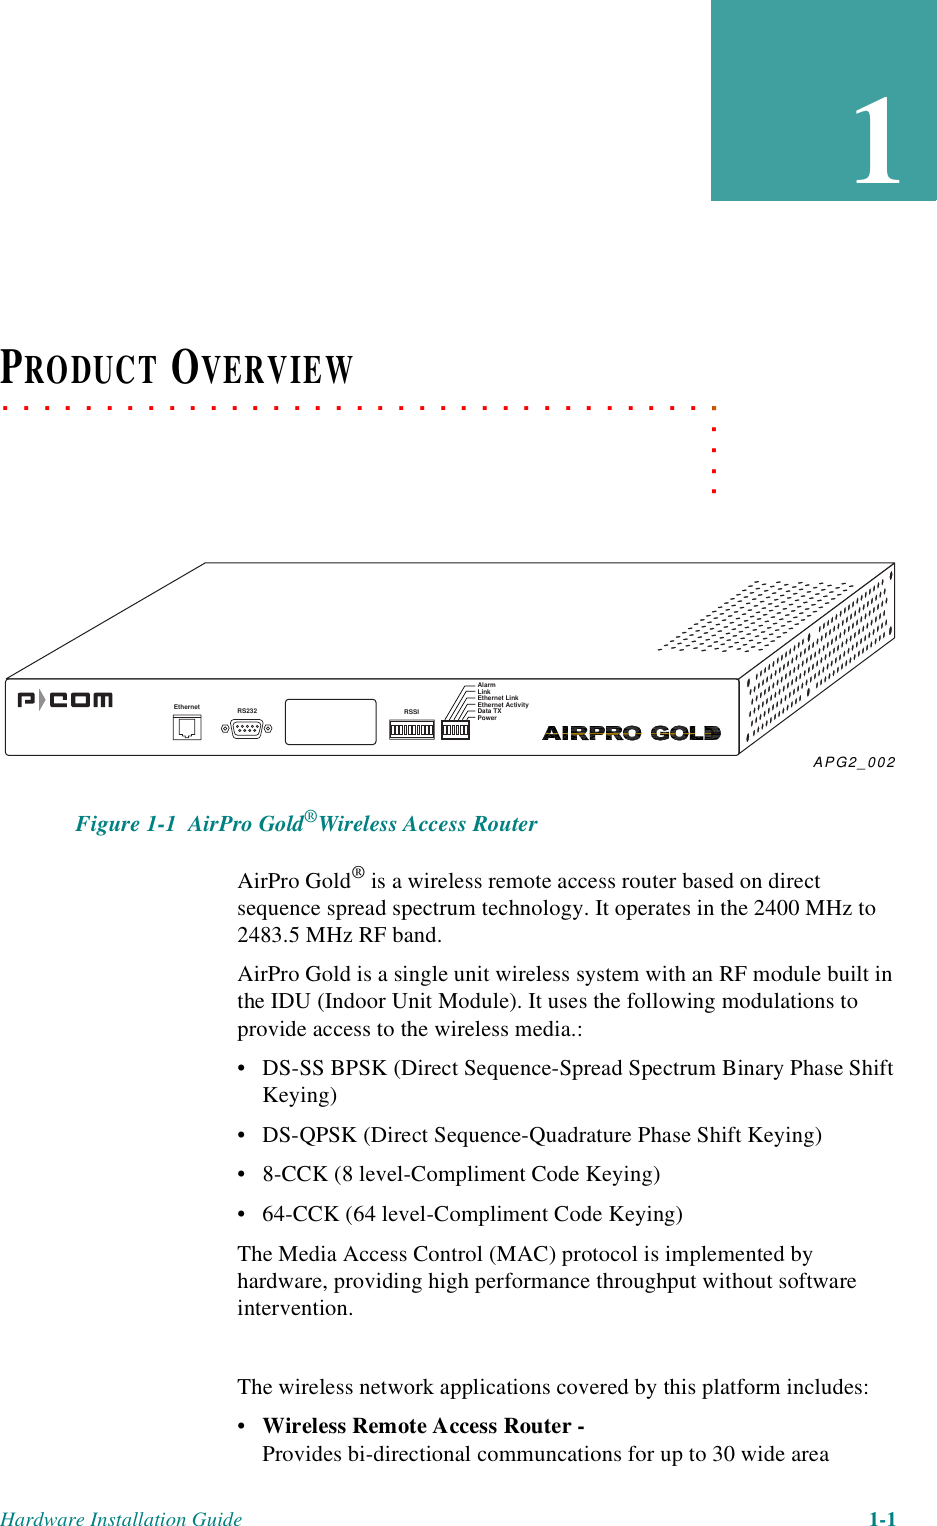 Hardware Installation Guide 1-11. . . . .. . . . . . . . . . . . . . . . . . . . . . . . . . . . . . . . . . .PRODUCT OVERVIEW Figure 1-1  AirPro Gold®Wireless Access RouterAirPro Gold® is a wireless remote access router based on direct sequence spread spectrum technology. It operates in the 2400 MHz to 2483.5 MHz RF band. AirPro Gold is a single unit wireless system with an RF module built in the IDU (Indoor Unit Module). It uses the following modulations to provide access to the wireless media.:• DS-SS BPSK (Direct Sequence-Spread Spectrum Binary Phase Shift Keying)• DS-QPSK (Direct Sequence-Quadrature Phase Shift Keying)• 8-CCK (8 level-Compliment Code Keying)• 64-CCK (64 level-Compliment Code Keying)The Media Access Control (MAC) protocol is implemented by hardware, providing high performance throughput without software intervention.The wireless network applications covered by this platform includes:•Wireless Remote Access Router - Provides bi-directional communcations for up to 30 wide area APG2_002Ethernet RS232 RSSIAlarmLinkEthernet LinkEthernet ActivityData TXPower